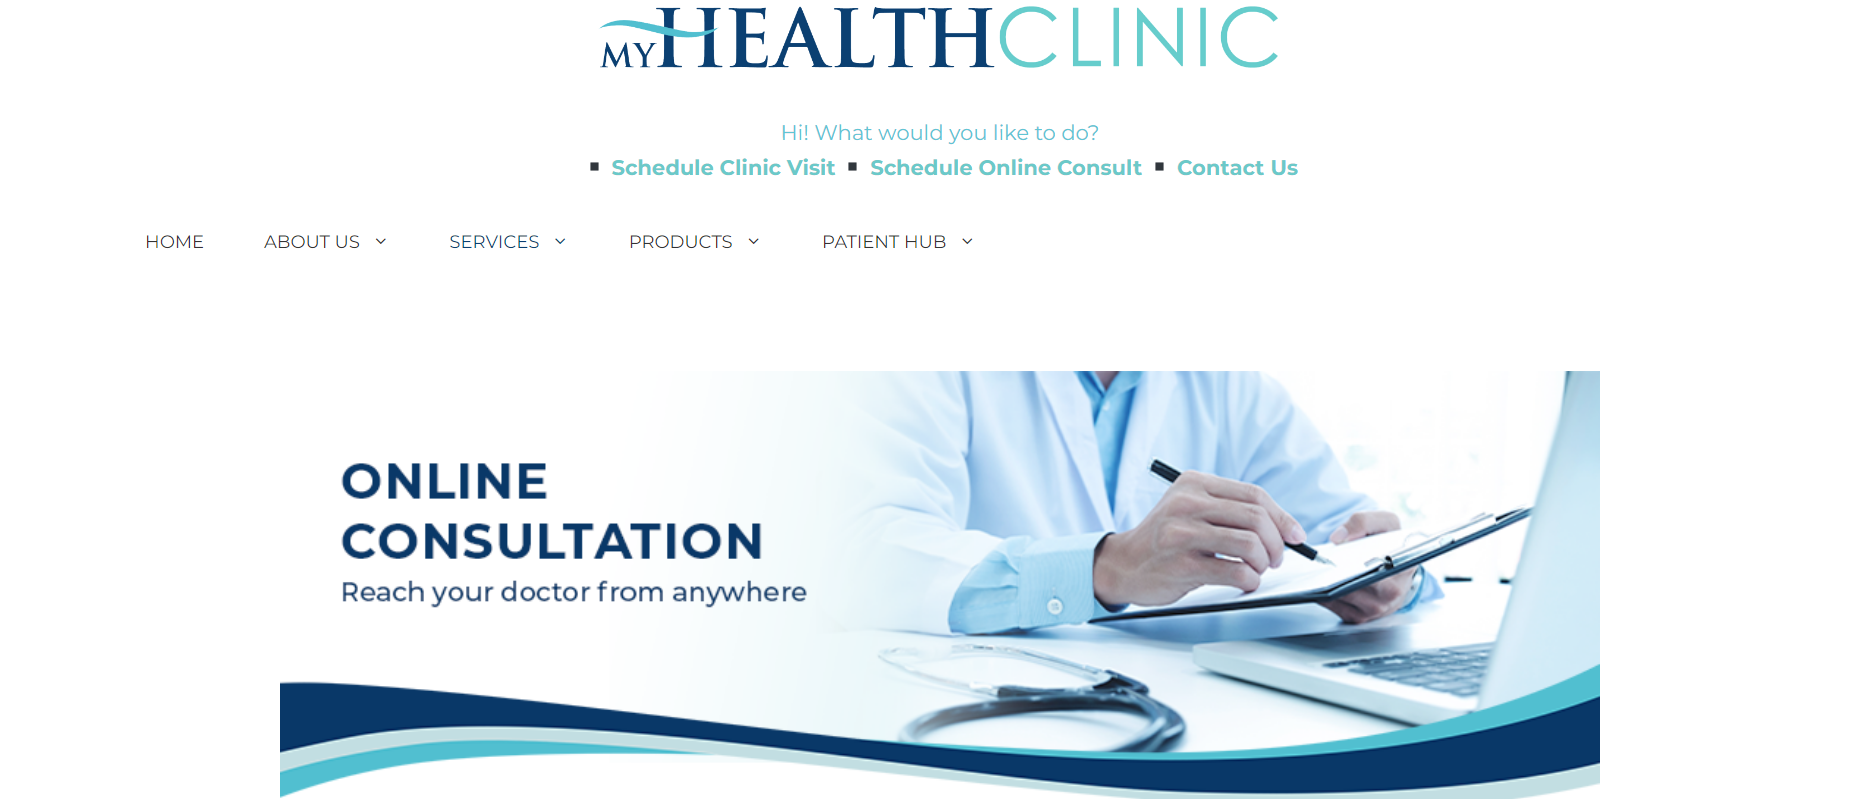 online medical consultation philippines - myhealth